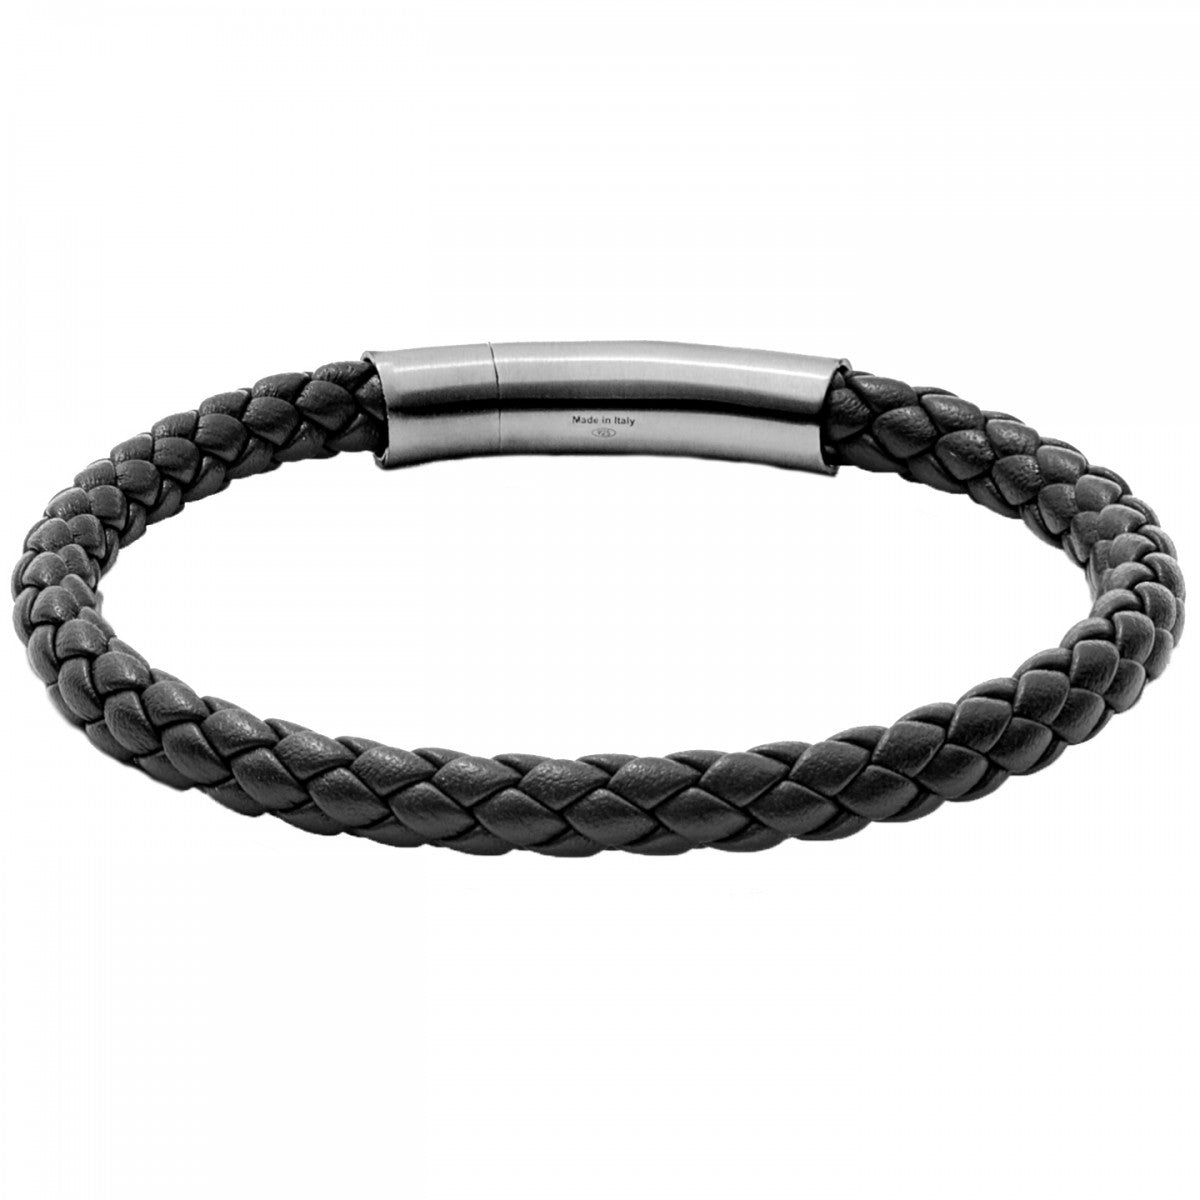 Tateossian Tubo Charles Taito Men's Leather and Silver Bracelet ...